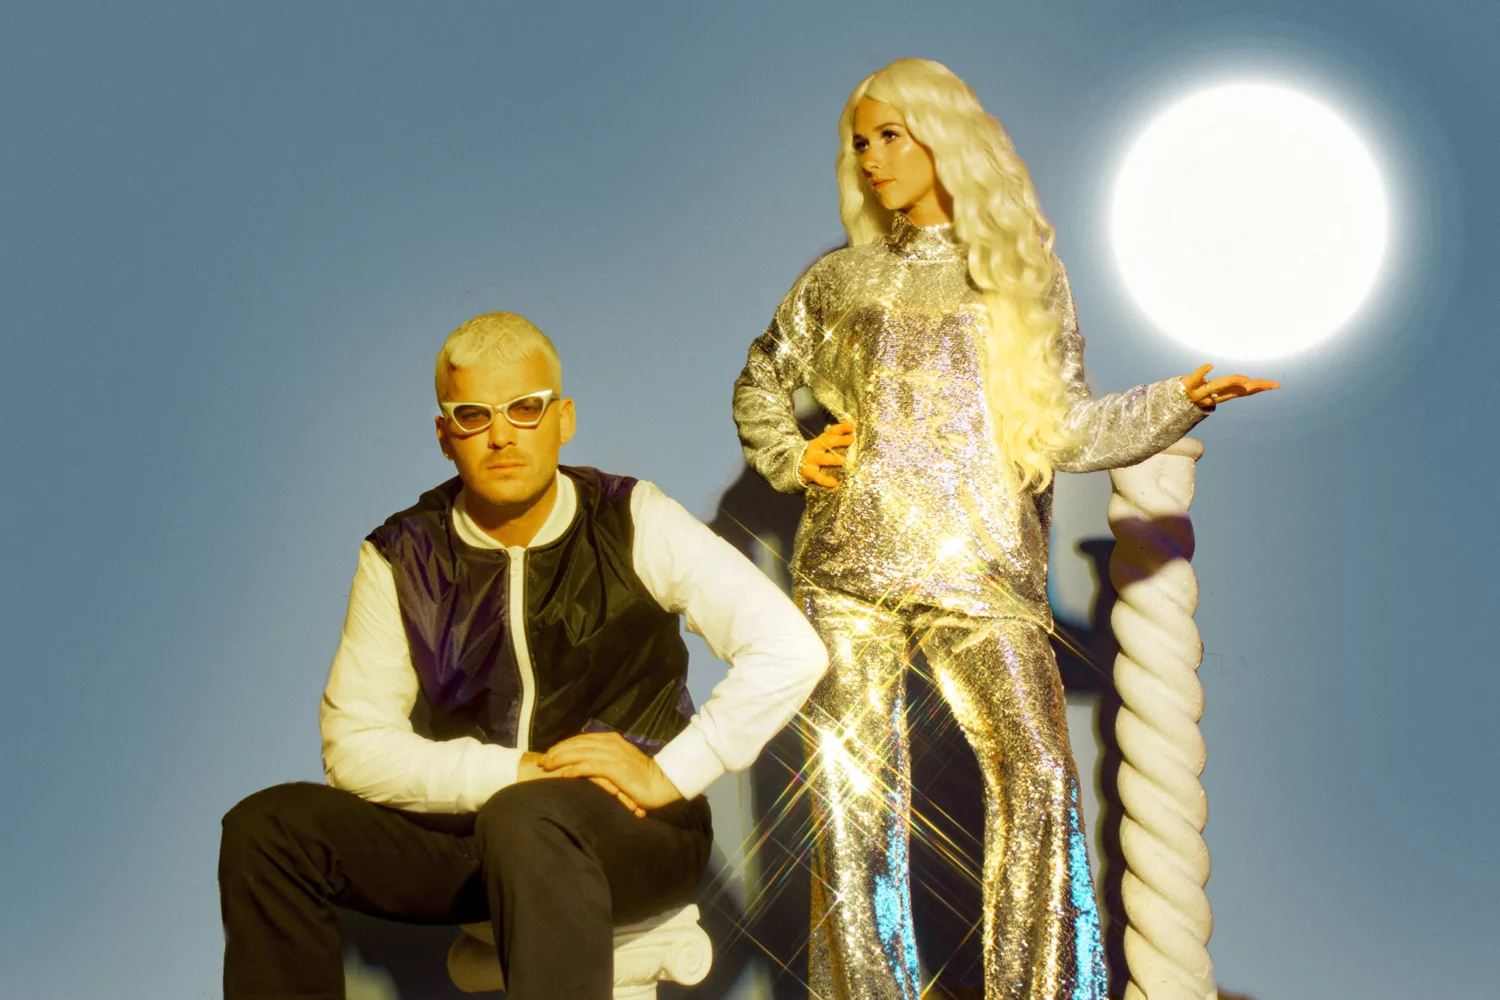 Broods air new track ‘Falling Apart’